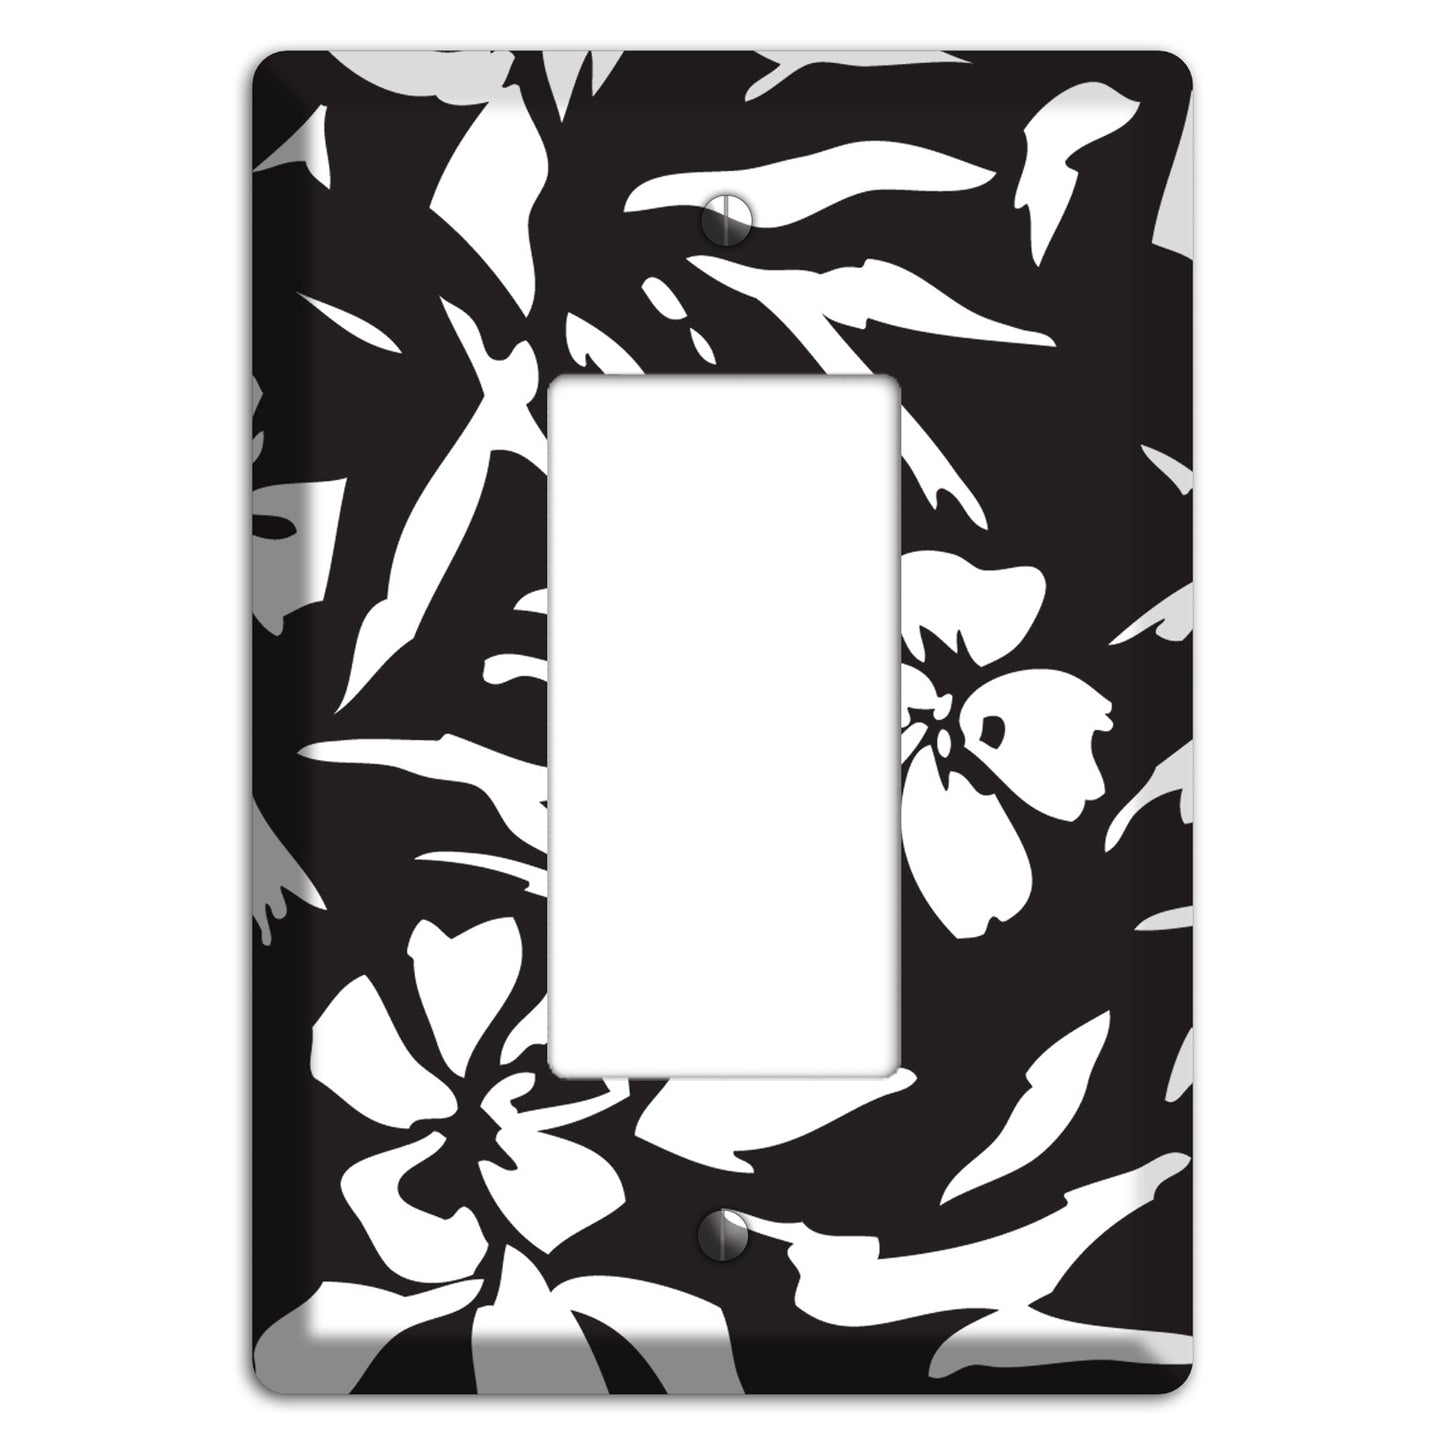 Black with White Woodcut Floral Rocker Wallplate